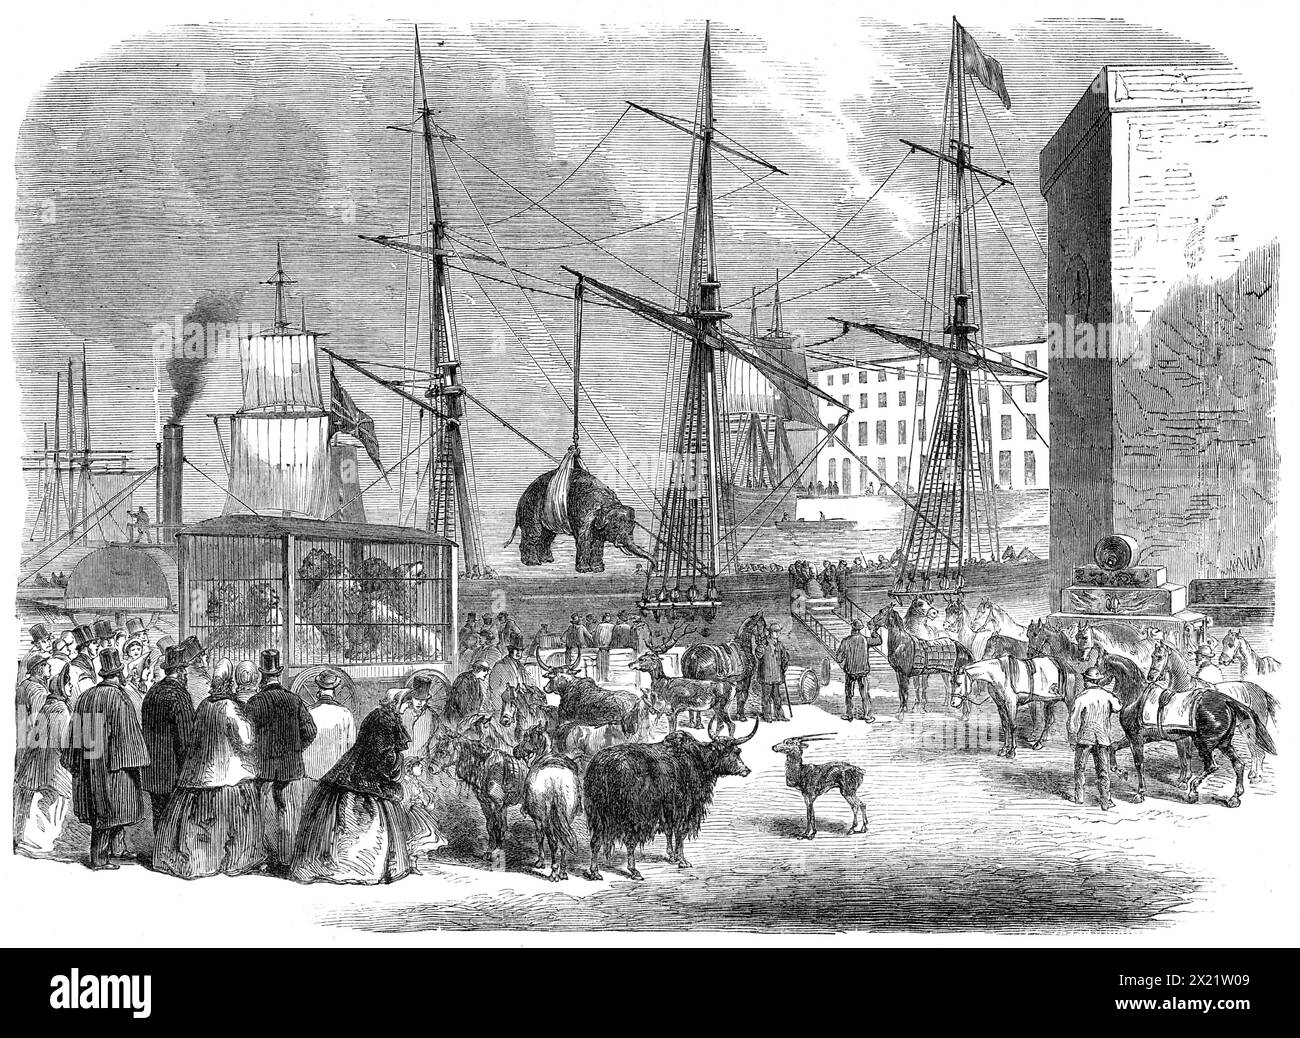 Shipping wild animals in the London Docks, 1864. 'Amidst the diverse commodities brought into the port of London by so many vessels from every region of the globe, a visitor to the docks may now and then have an opportunity of seeing the arrival of a cargo of wild beasts, though it is but rarely, of course, that such an importation takes place. The zoological collections in the metropolis and in some provincial towns, as well as the exhibitions paraded in travelling caravans, must indeed be constantly recruited with fresh specimens, not only to make up for a rate of mortality which exceeds tha Stock Photo